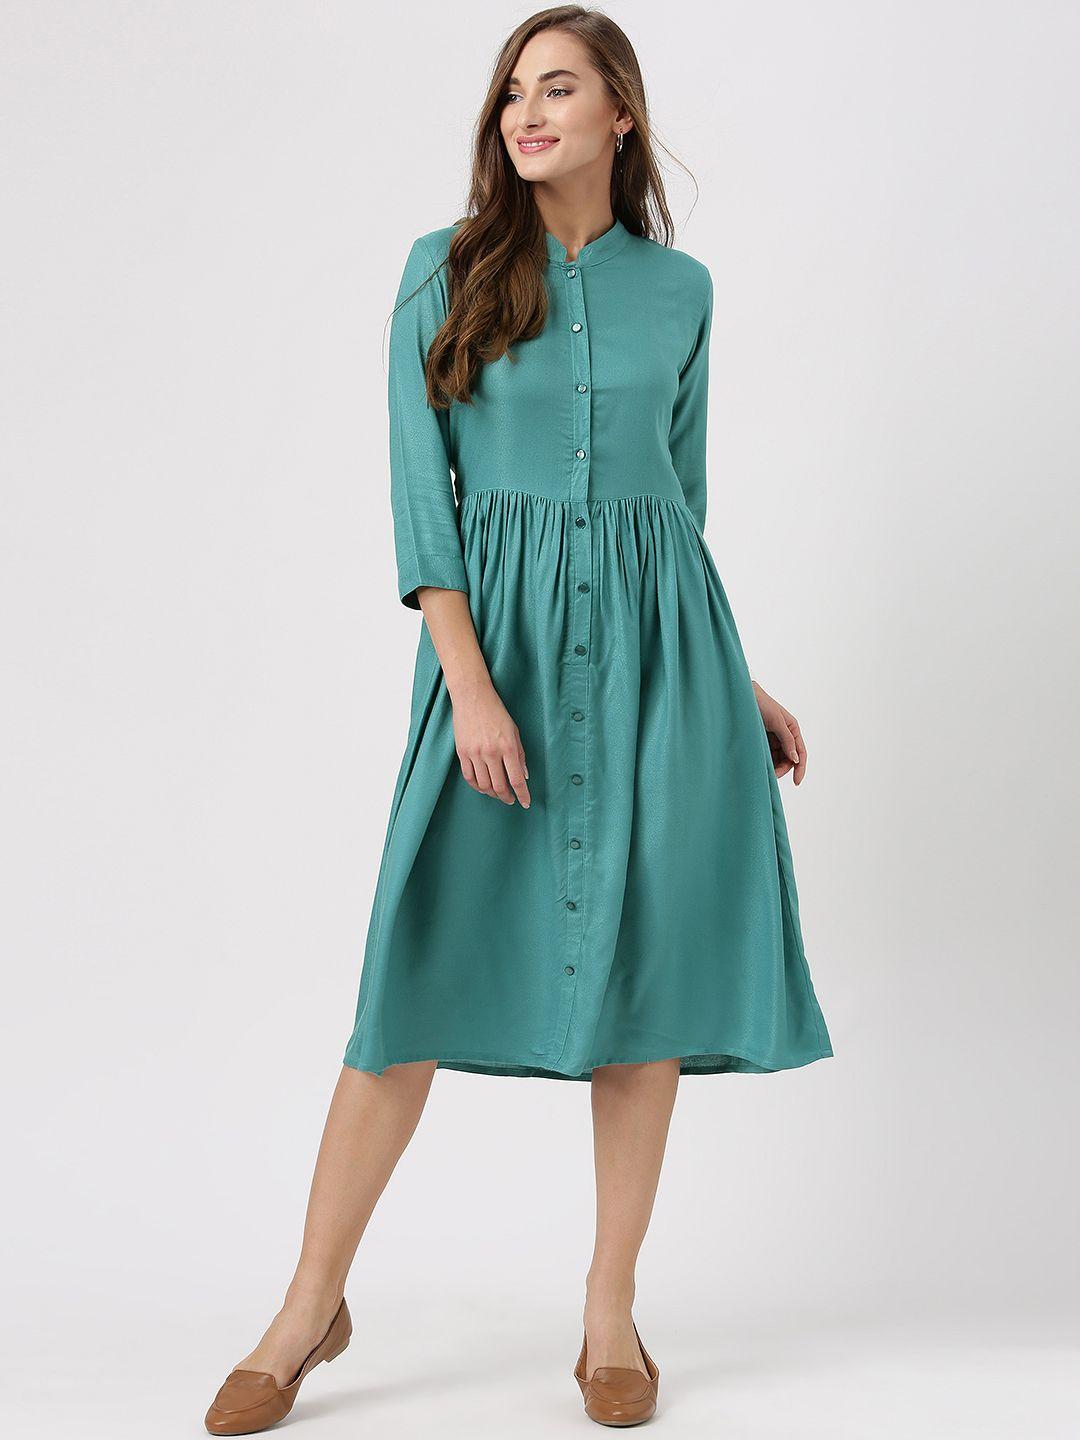 marie claire women green solid a-line  dress